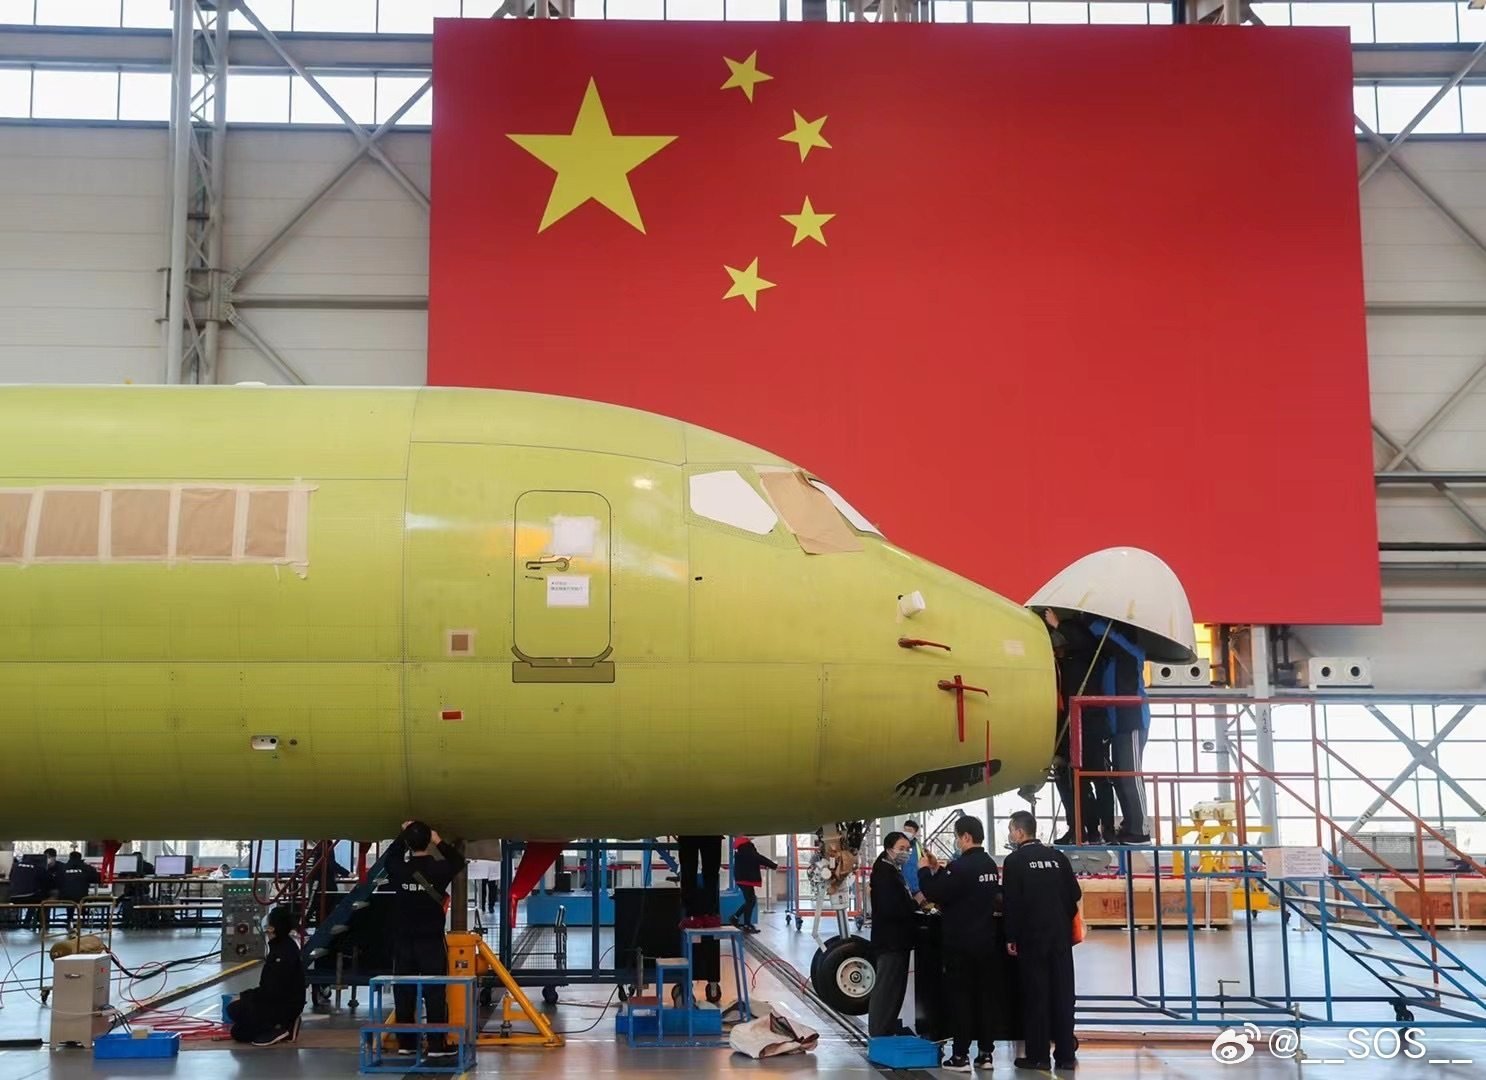 China’s maker of the C919 passenger jet says its manufacturing process will become more automated and intelligent. Photo: Weibo